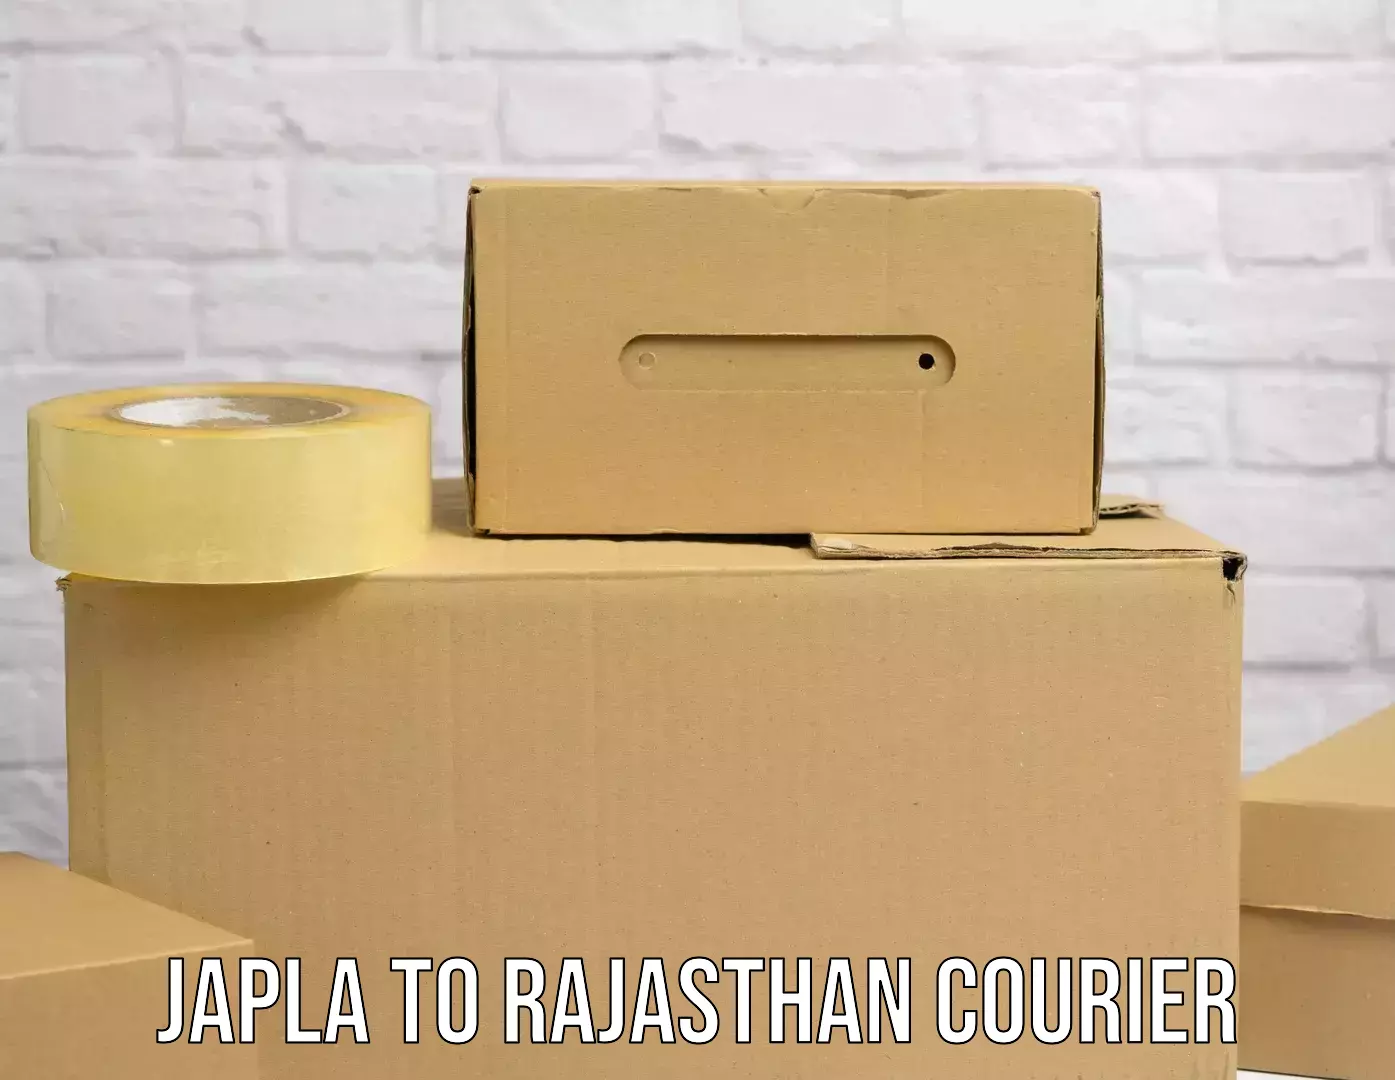 Courier service comparison Japla to Birla Institute of Technology and Science Pilani